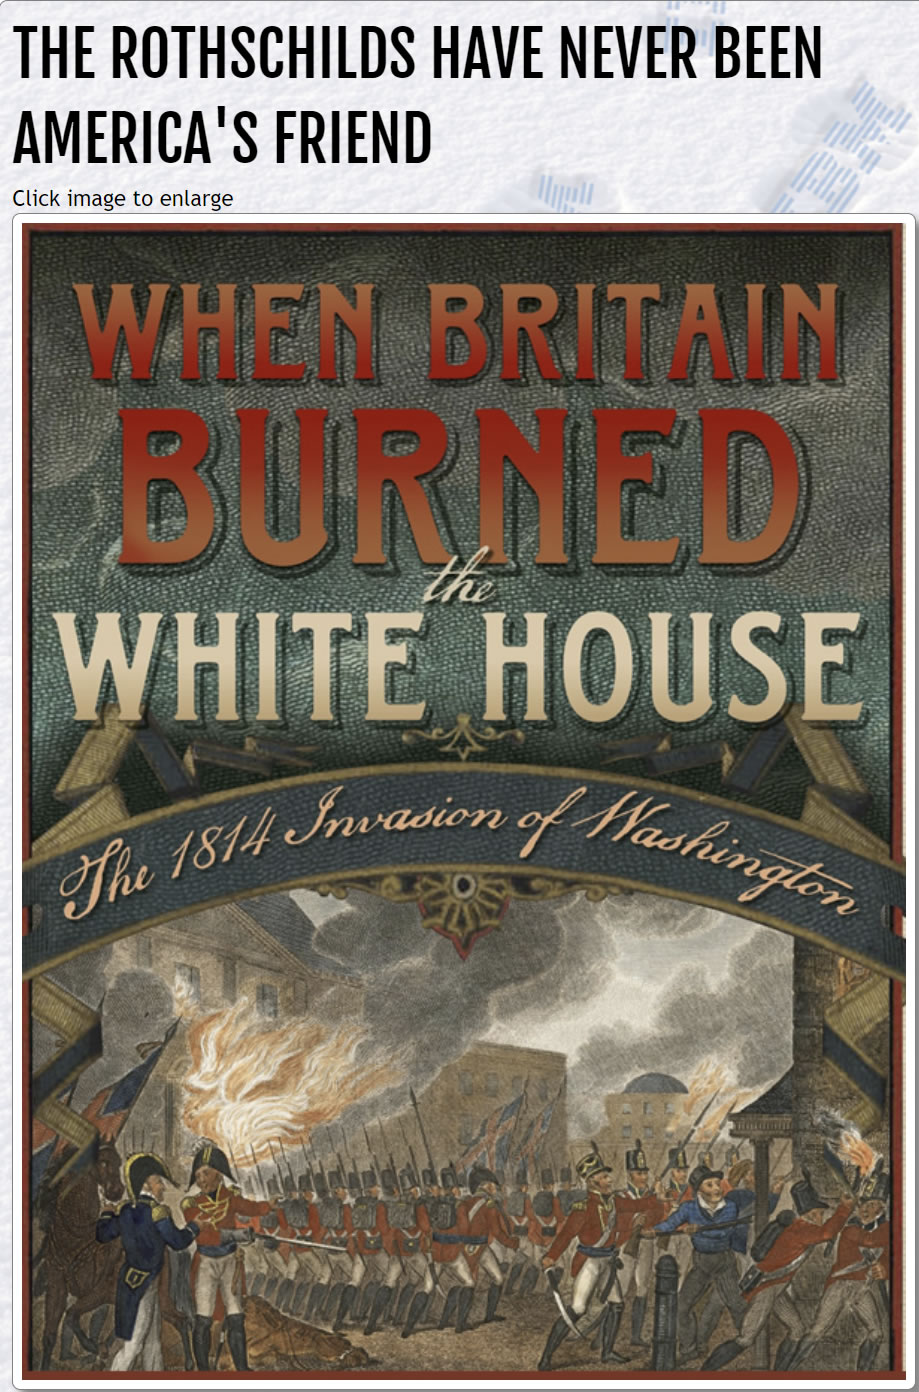 The Rothschilds funded the War of 1812 and the burning down of the White House in 1814.